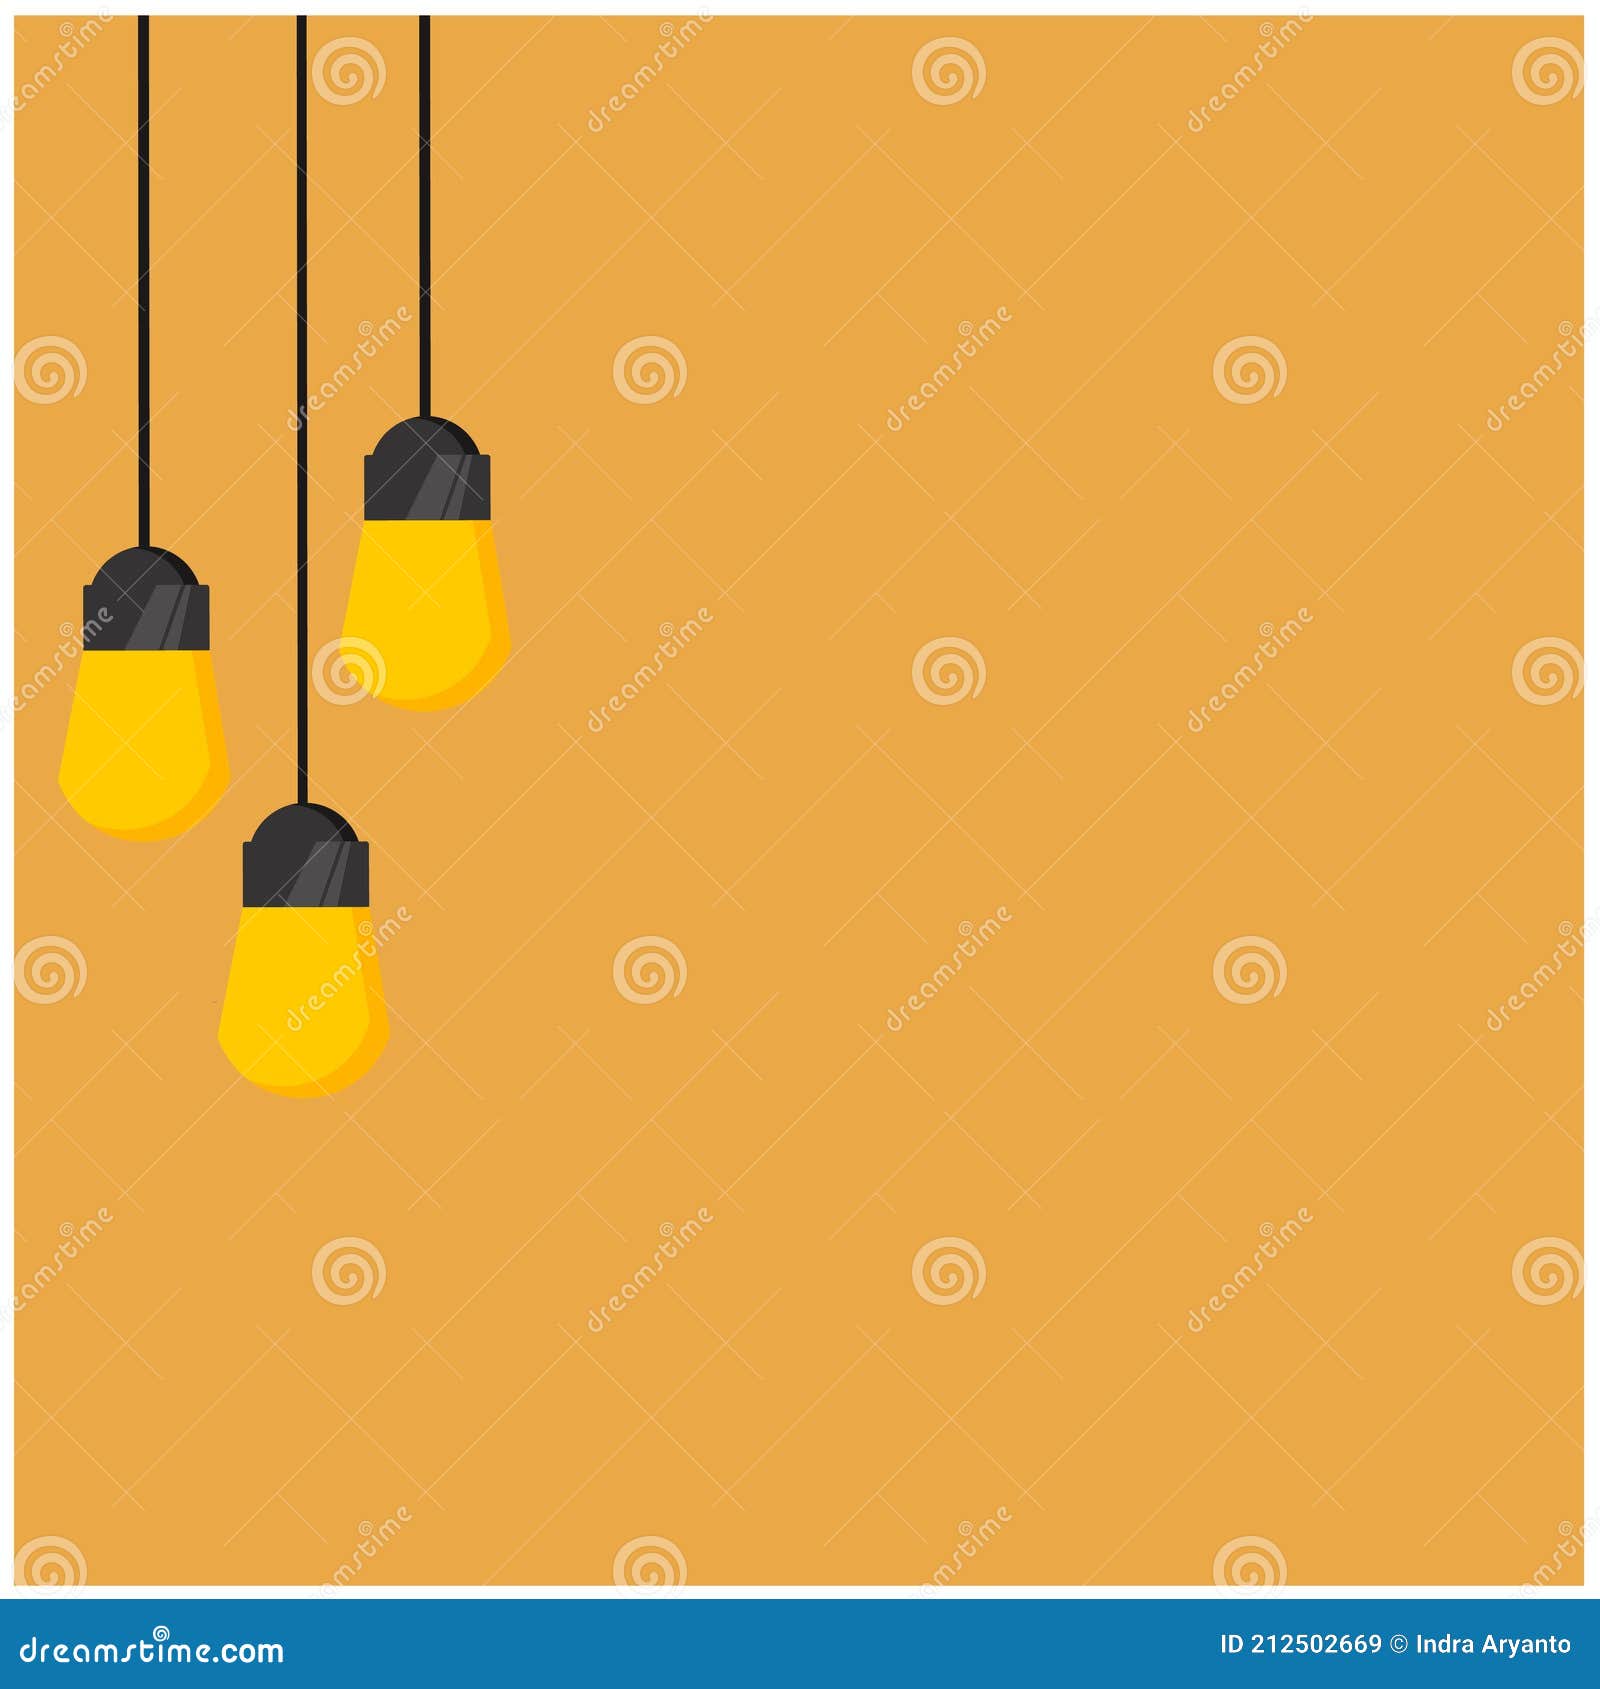 Background with Orange Colour and Lamp Stock Vector - Illustration of line,  advertising: 212502669